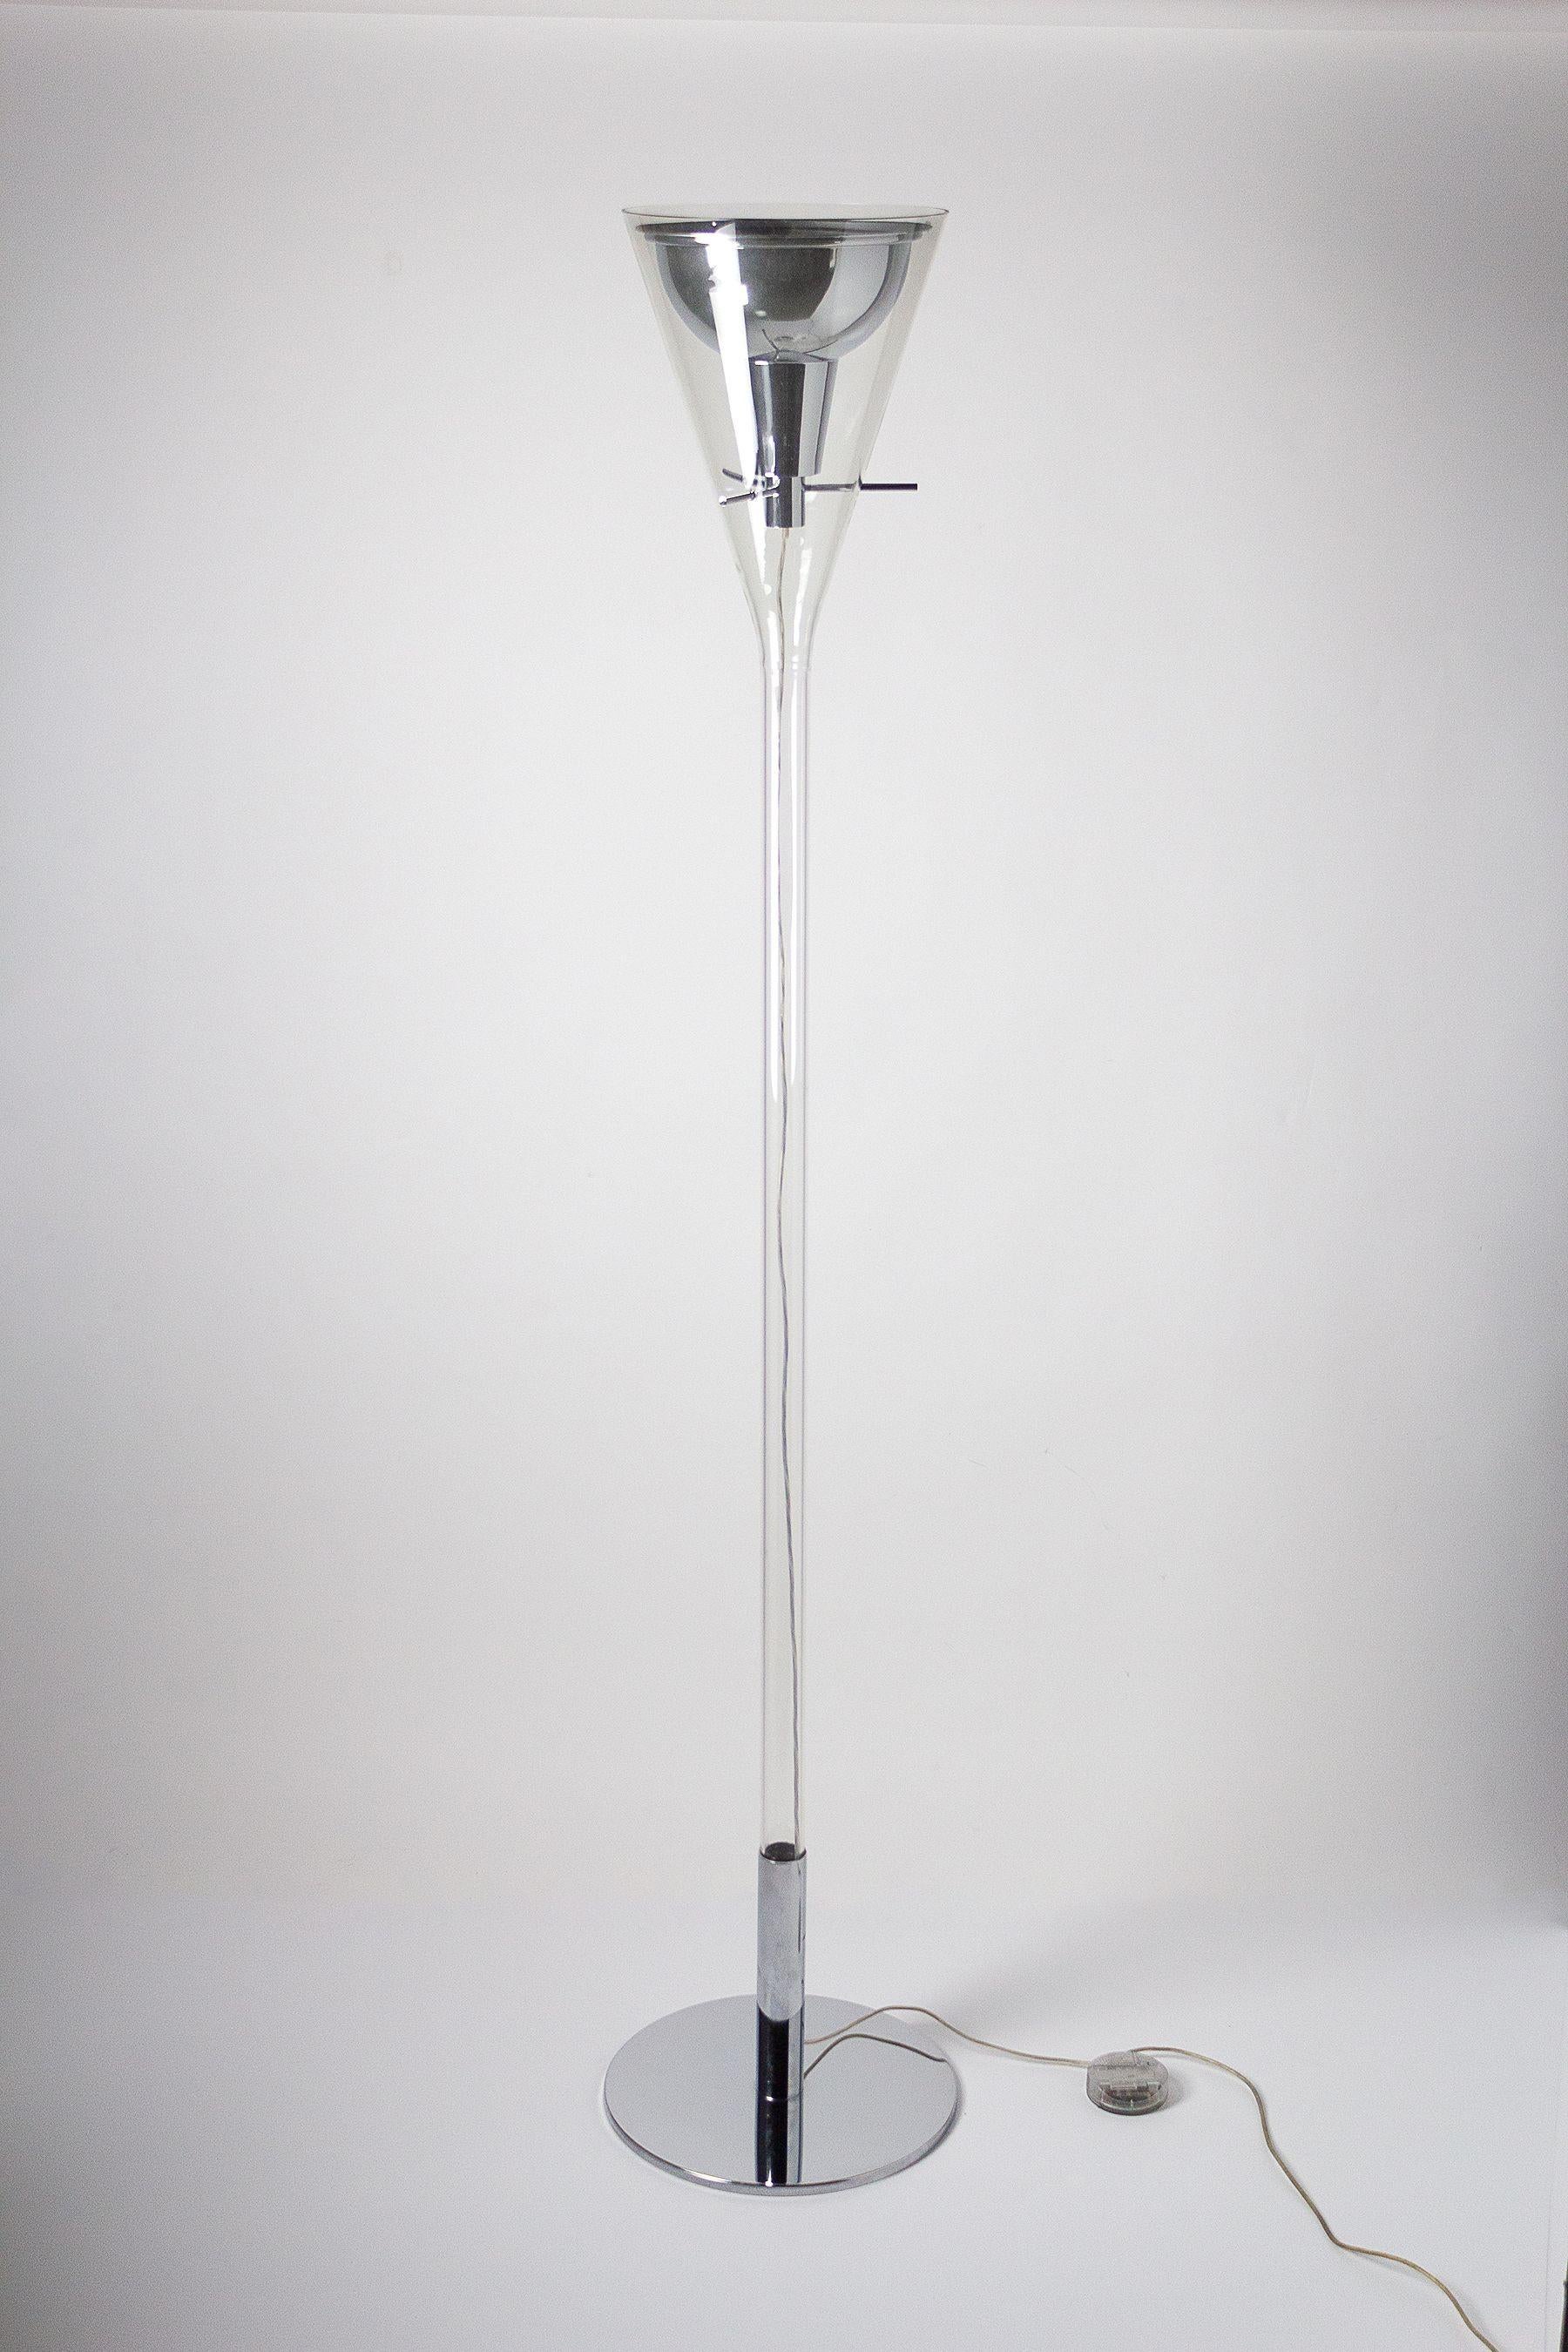 Flute floor lamp by Franco Raggi for Fontana Arte of Italy. This light features a Chrome plated base and mounting structure and a reflector in chrome-plated polished aluminum with a transparent feeding cable that runs through the borosilicate